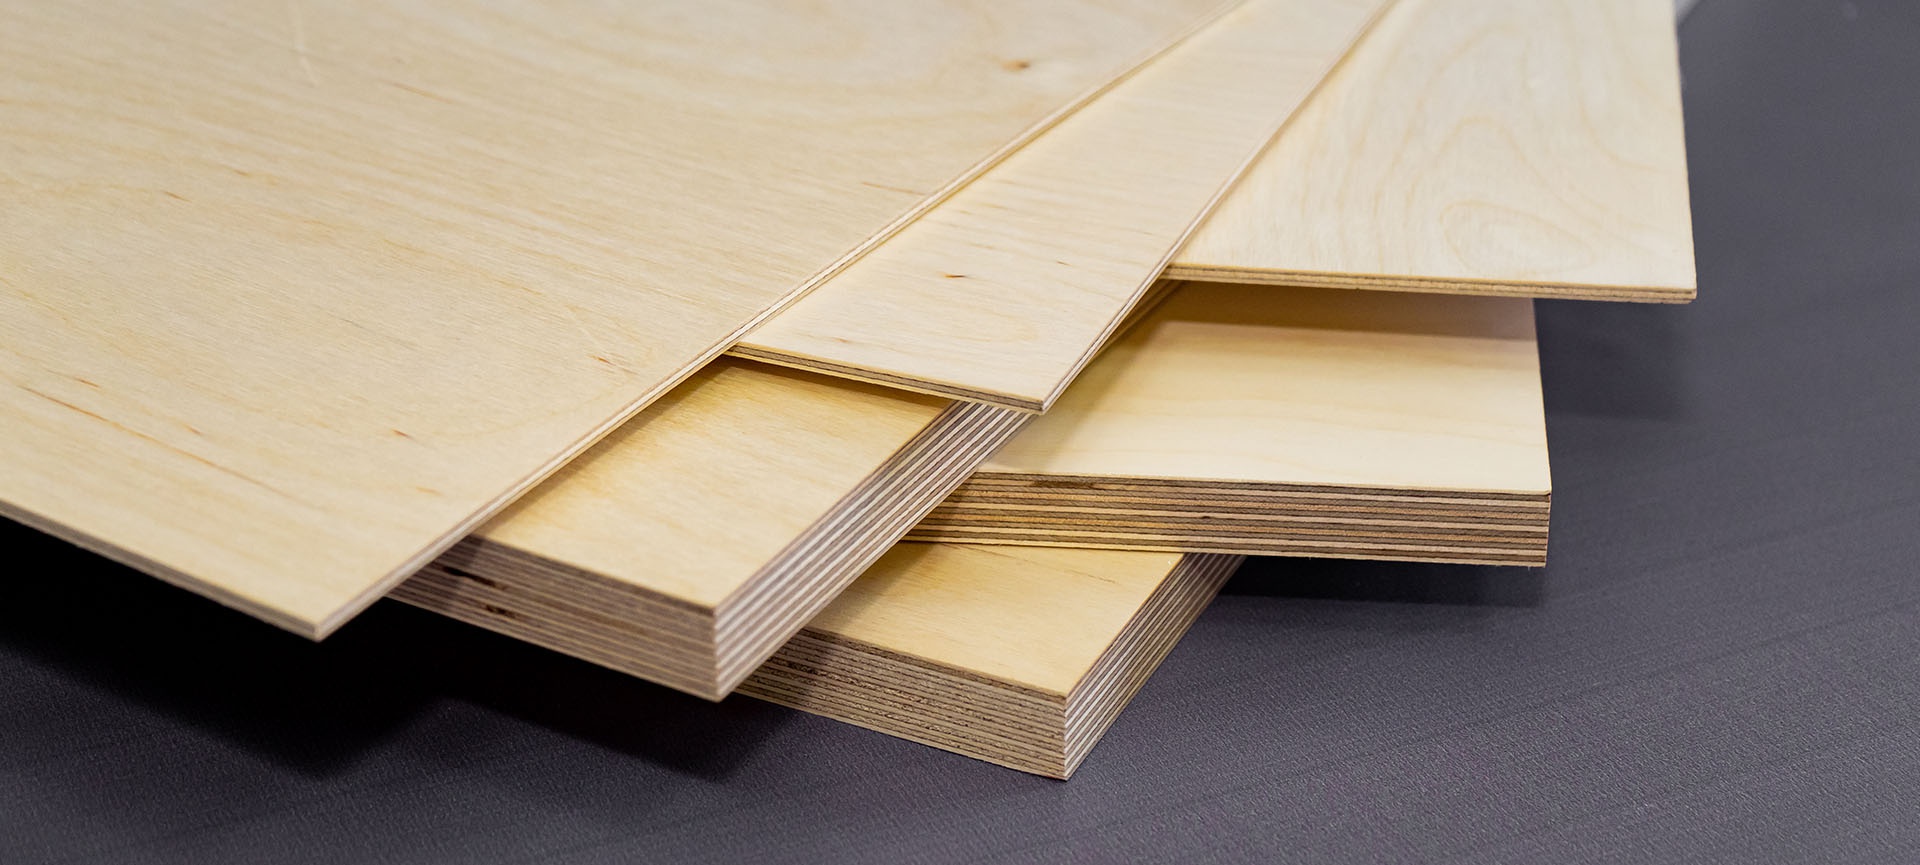 baltic birch plywood cost